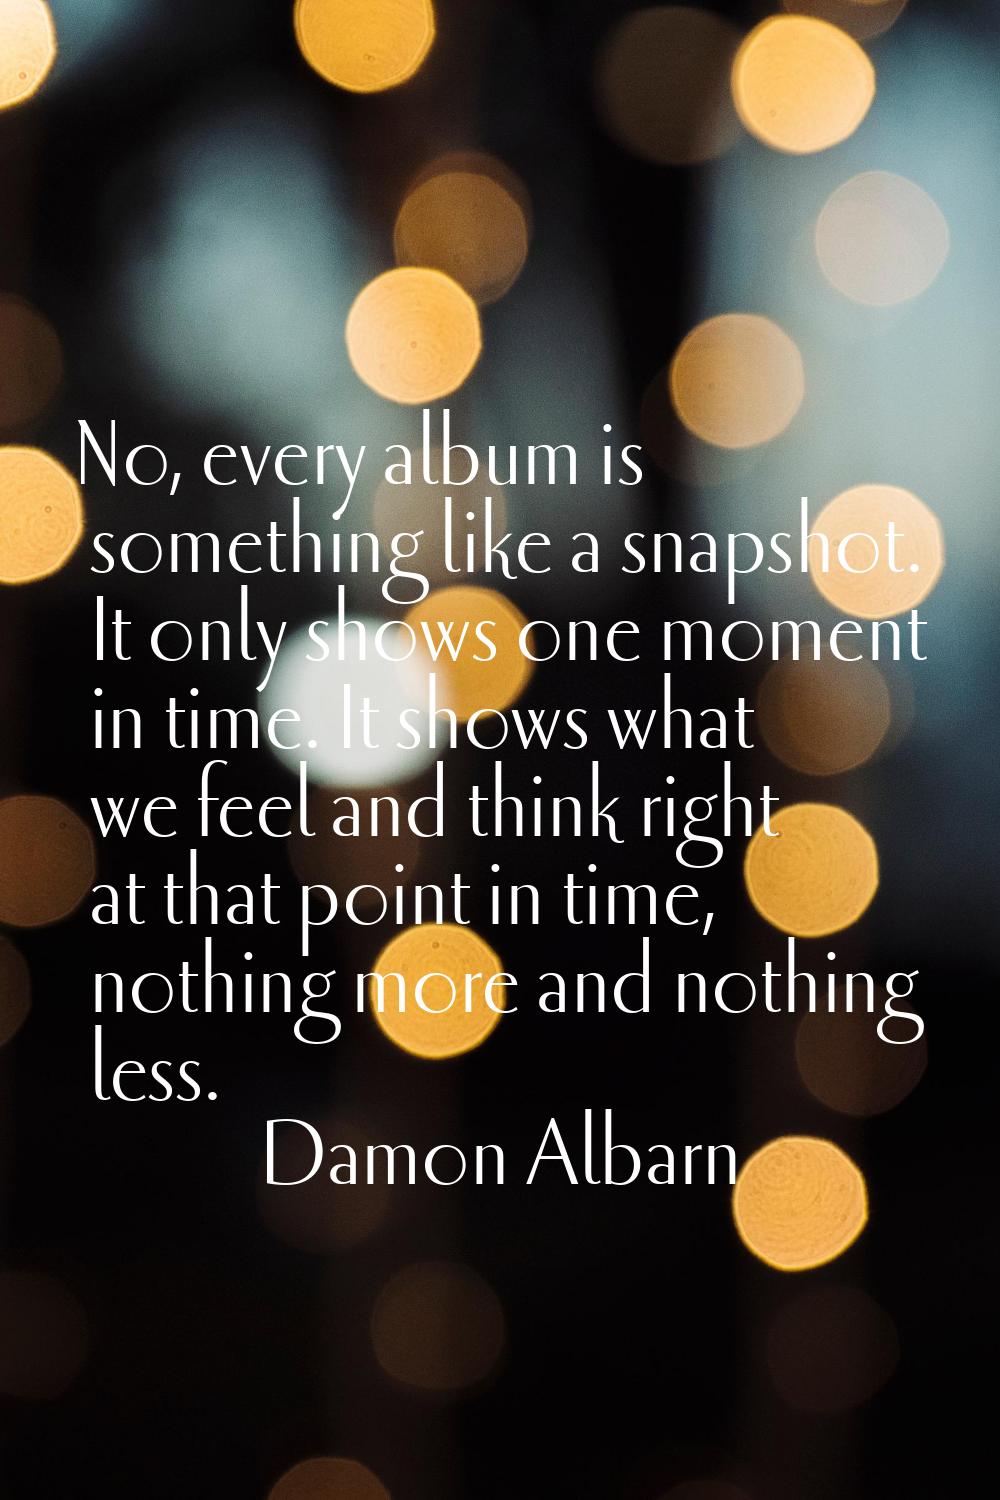 No, every album is something like a snapshot. It only shows one moment in time. It shows what we fe